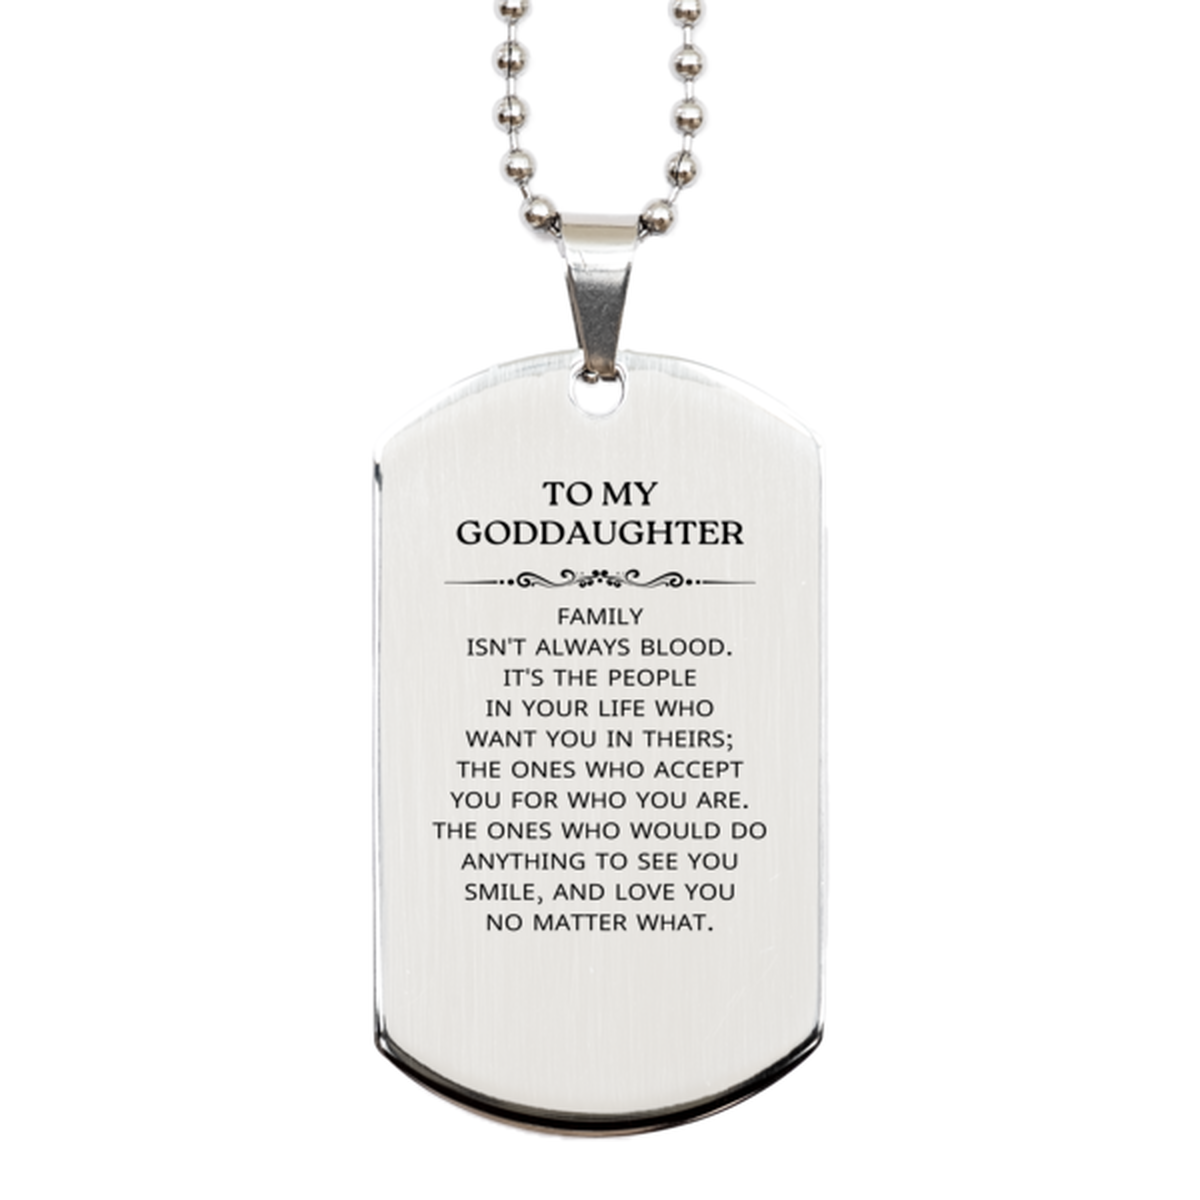 To My Goddaughter Gifts, Family isn't always blood, Goddaughter Silver Dog Tag, Birthday Christmas Unique Present For Goddaughter